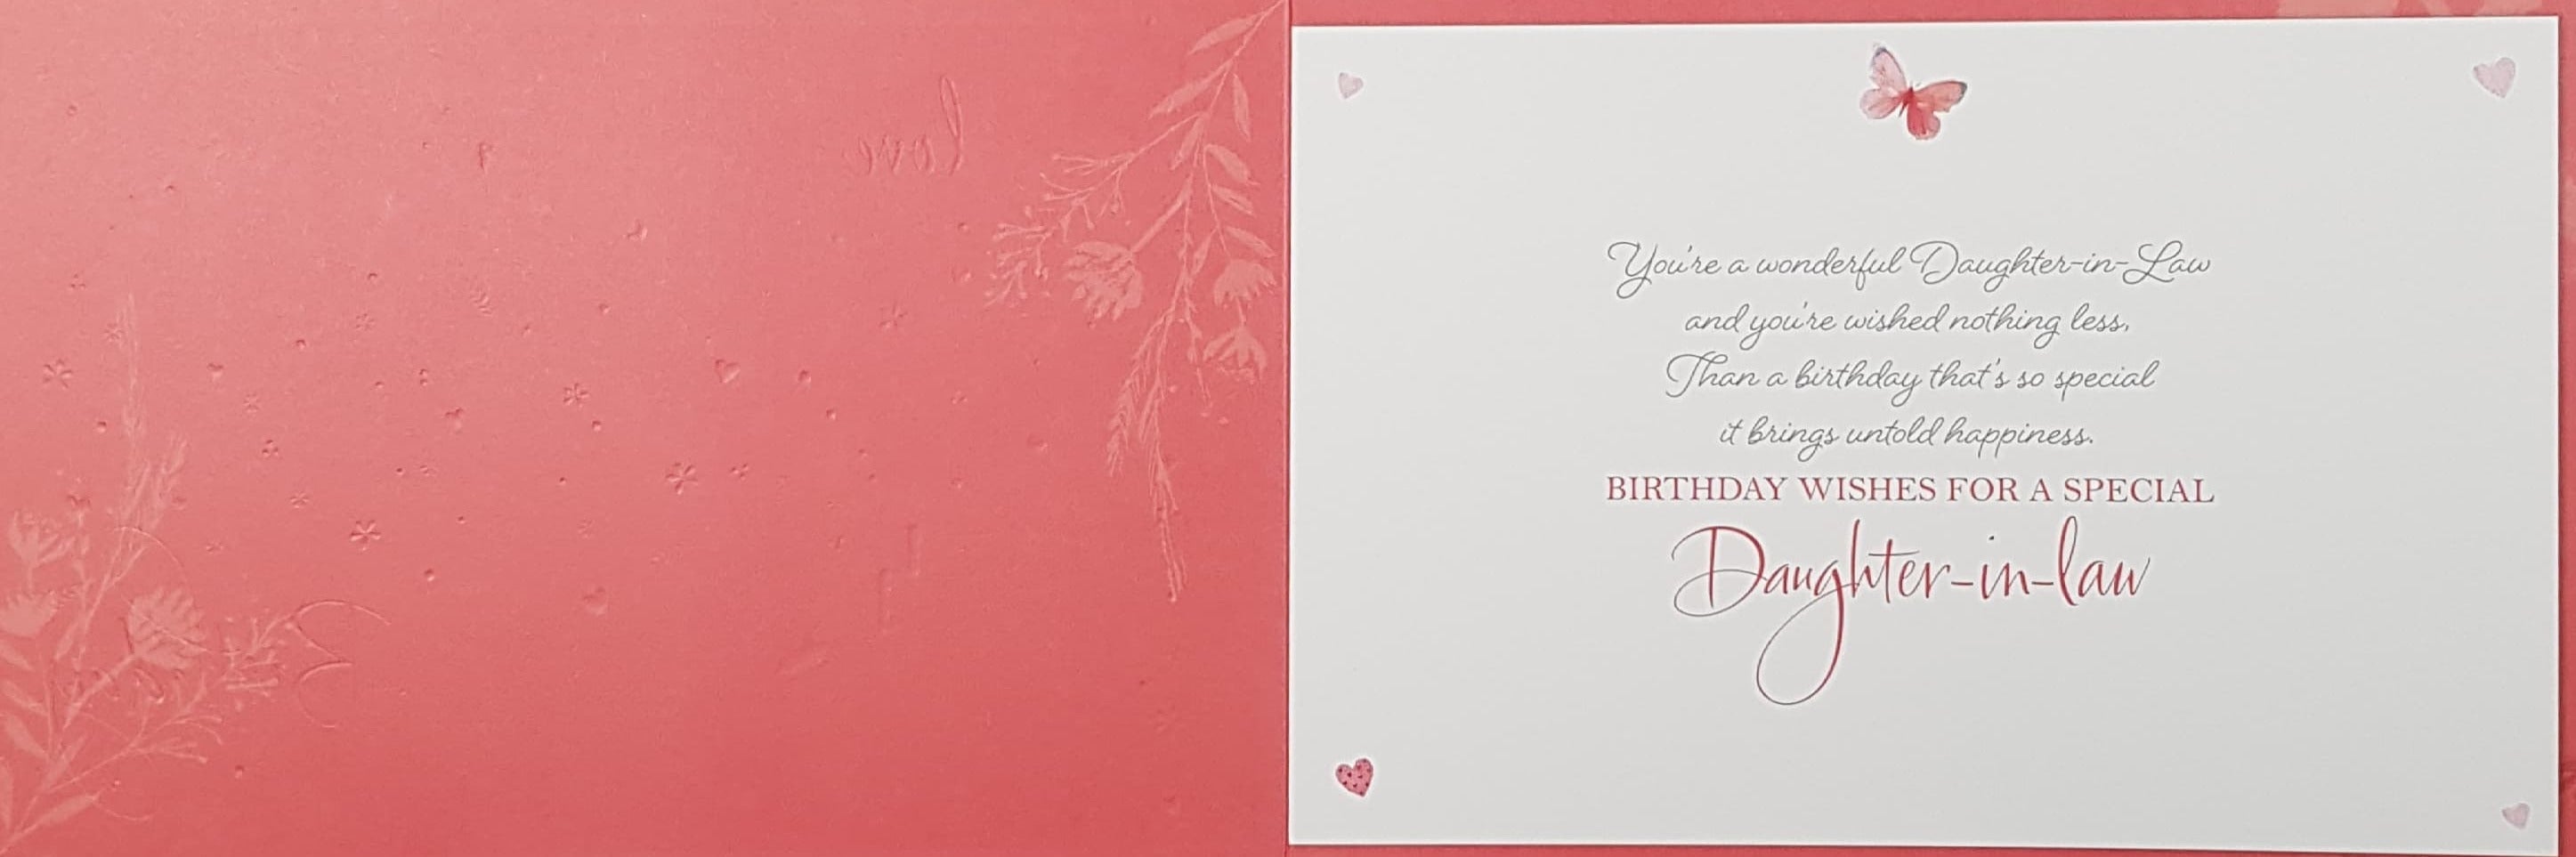 Birthday Card - Daughter-In-Law / A Pink Floral Font With Butterflies